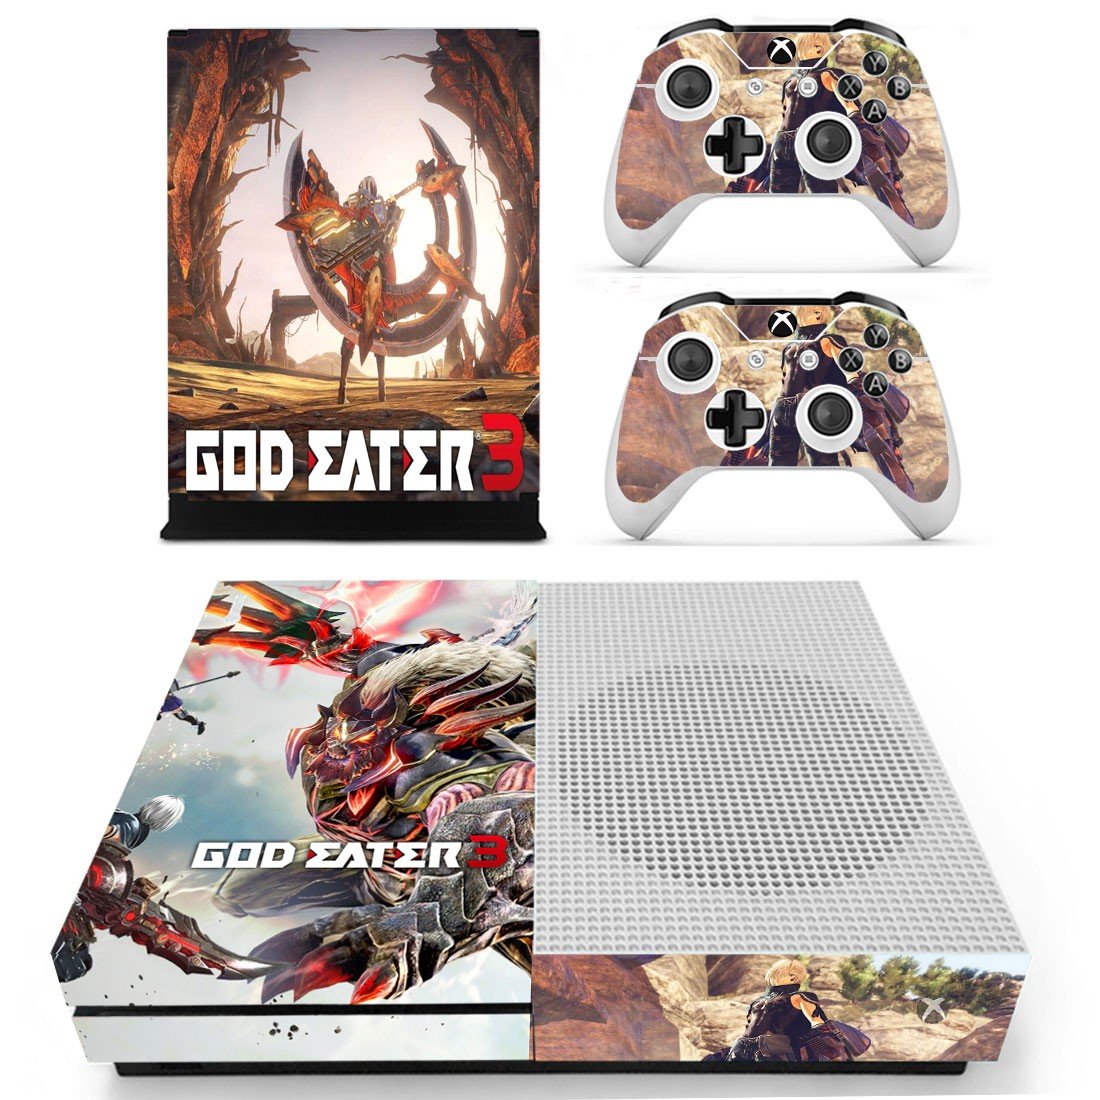 Xbox One S And Controllers Skin Cover God Eater 3